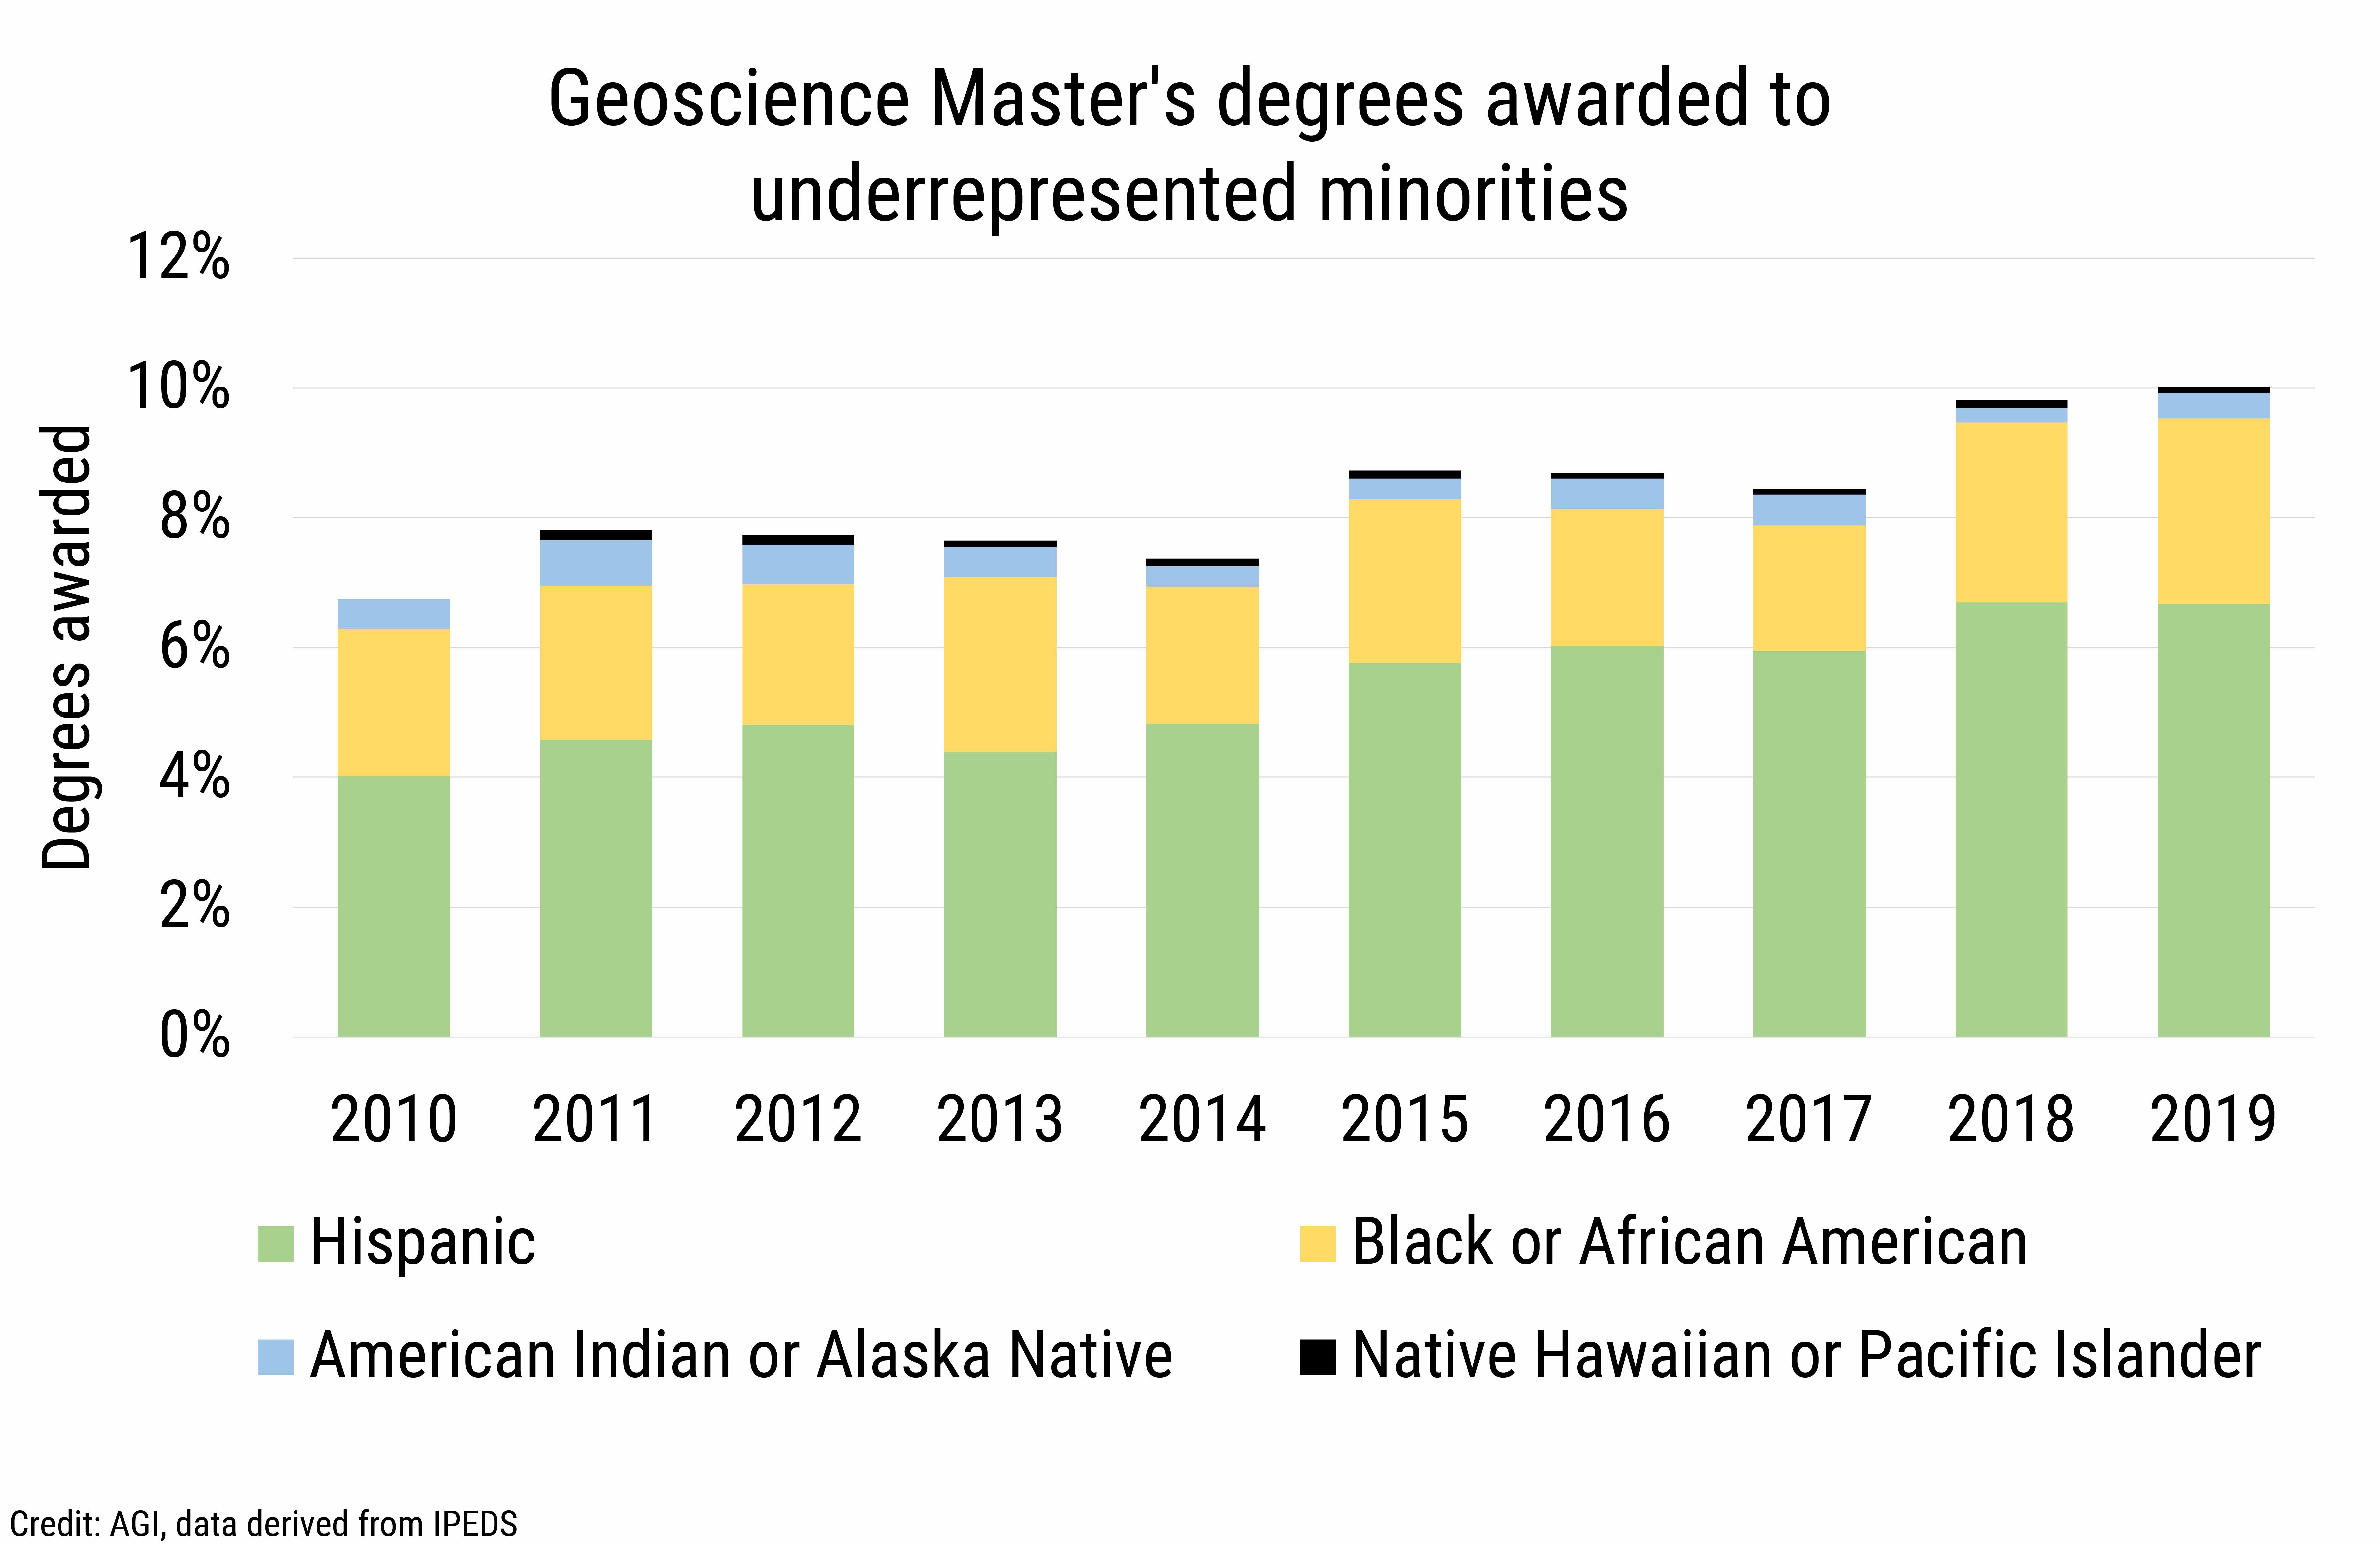 DB2020-023 chart09-Geoscience Master's degrees awarded to underrepresented minorities (Credit: AGI, data derived from IPEDS)